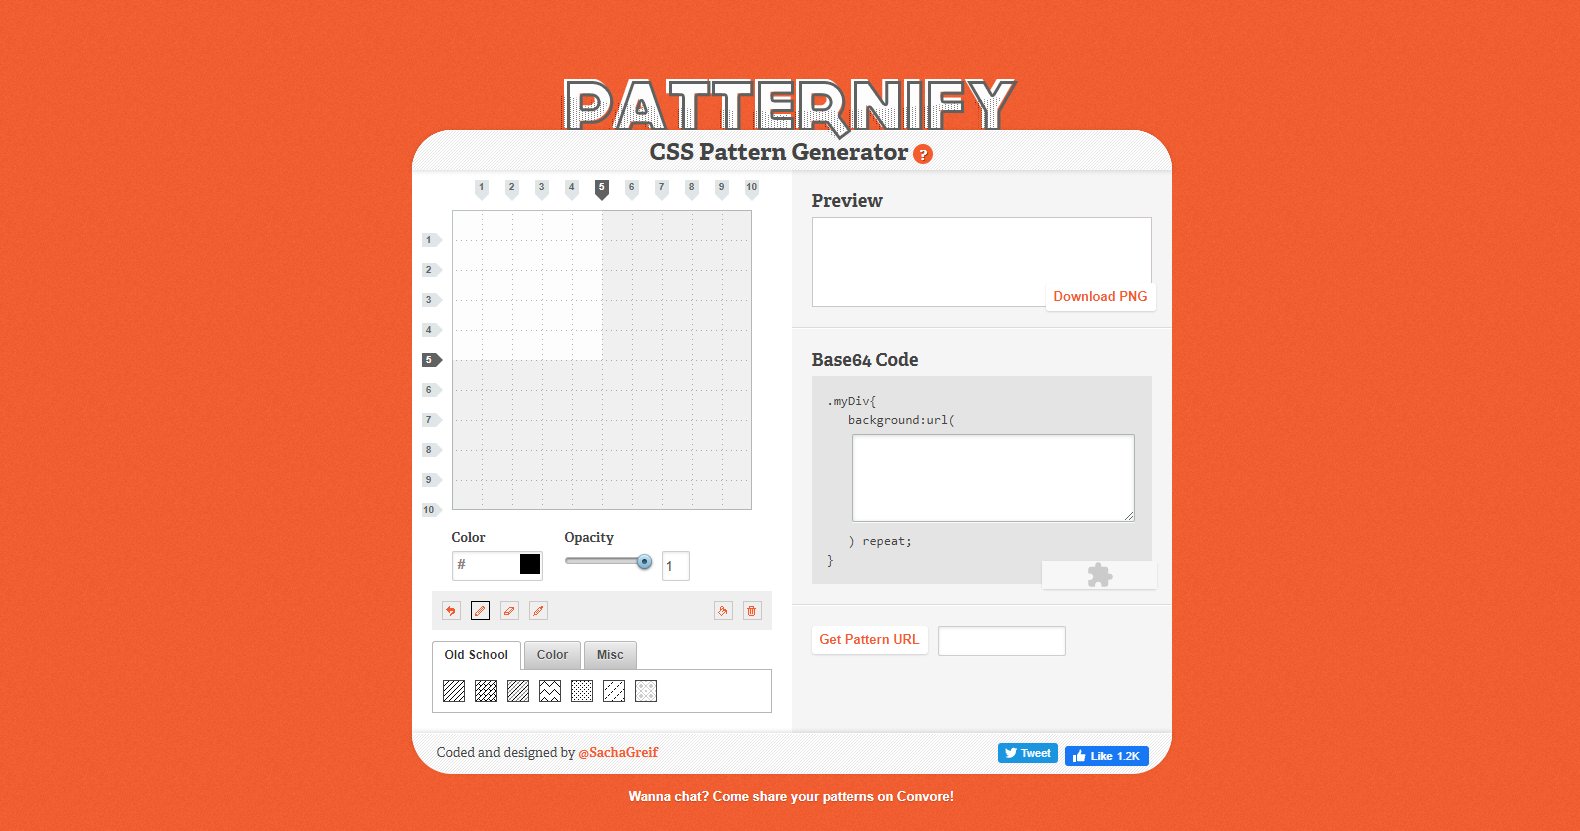 Home page of Patternify.